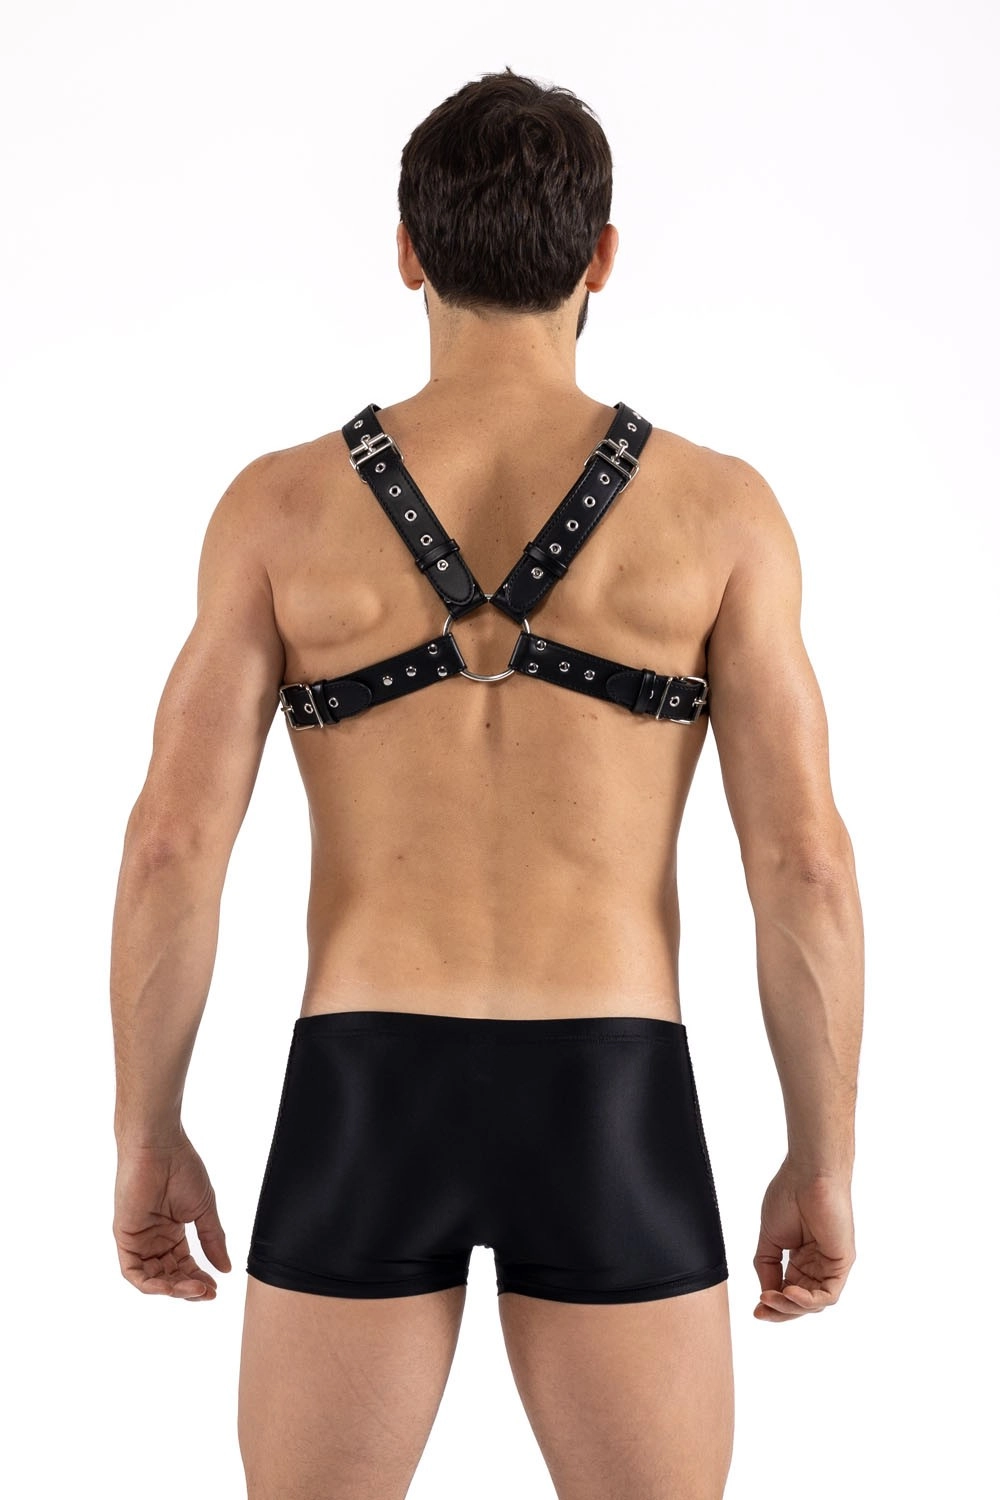 VISION x Harness in Schwarz Model " X Harness ", Gay Harness